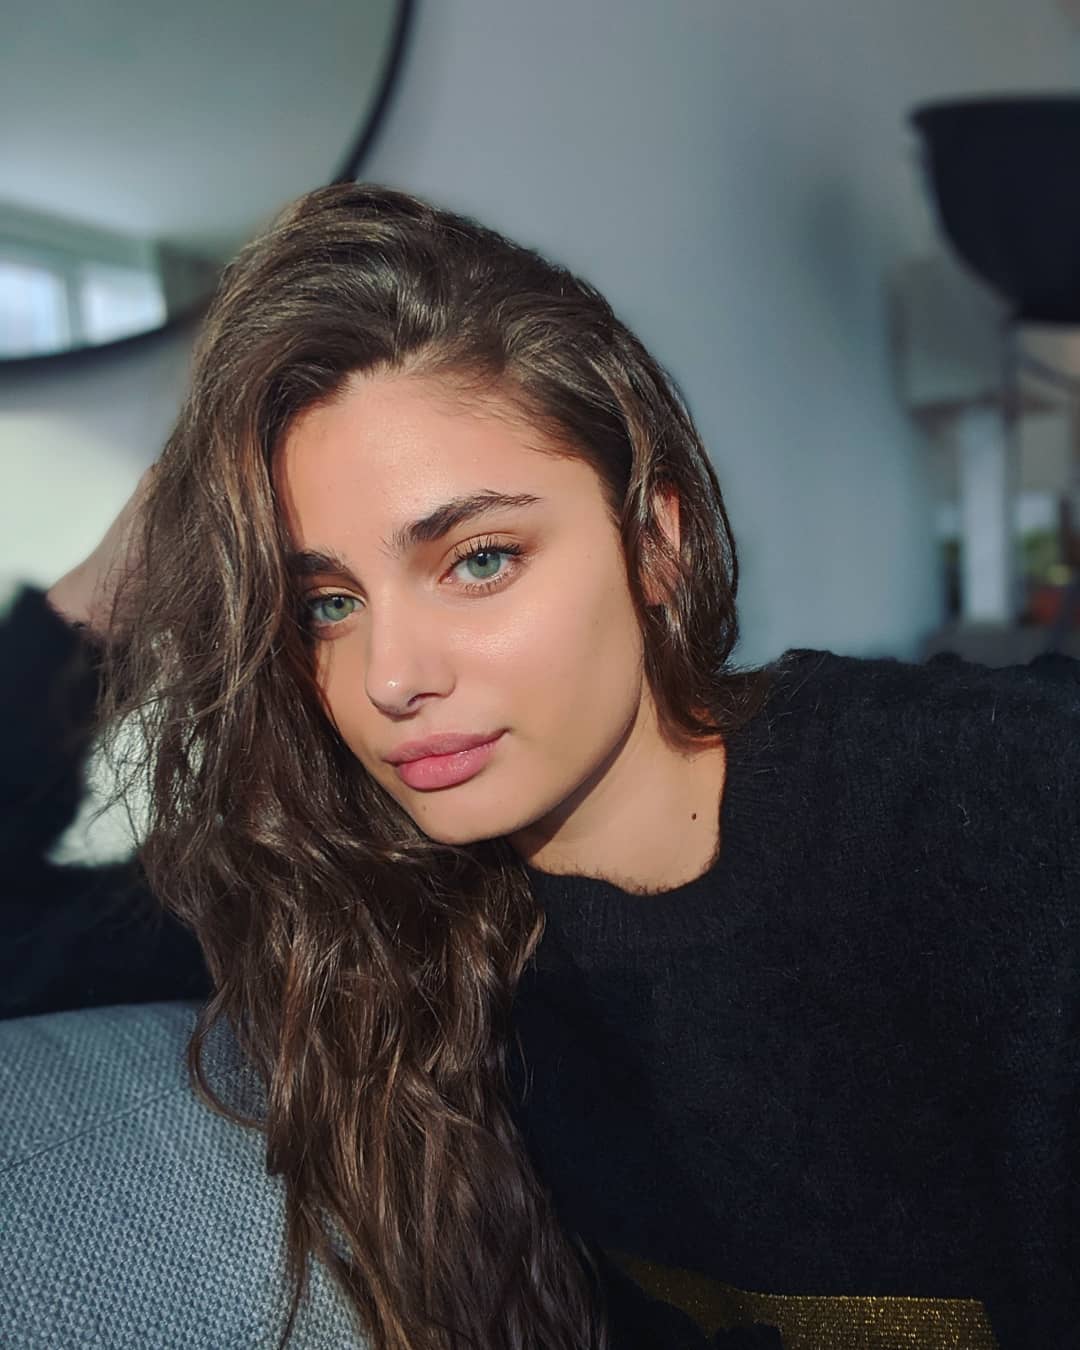 Taylor hill 16 hottest pics, taylor hill 16 instagram